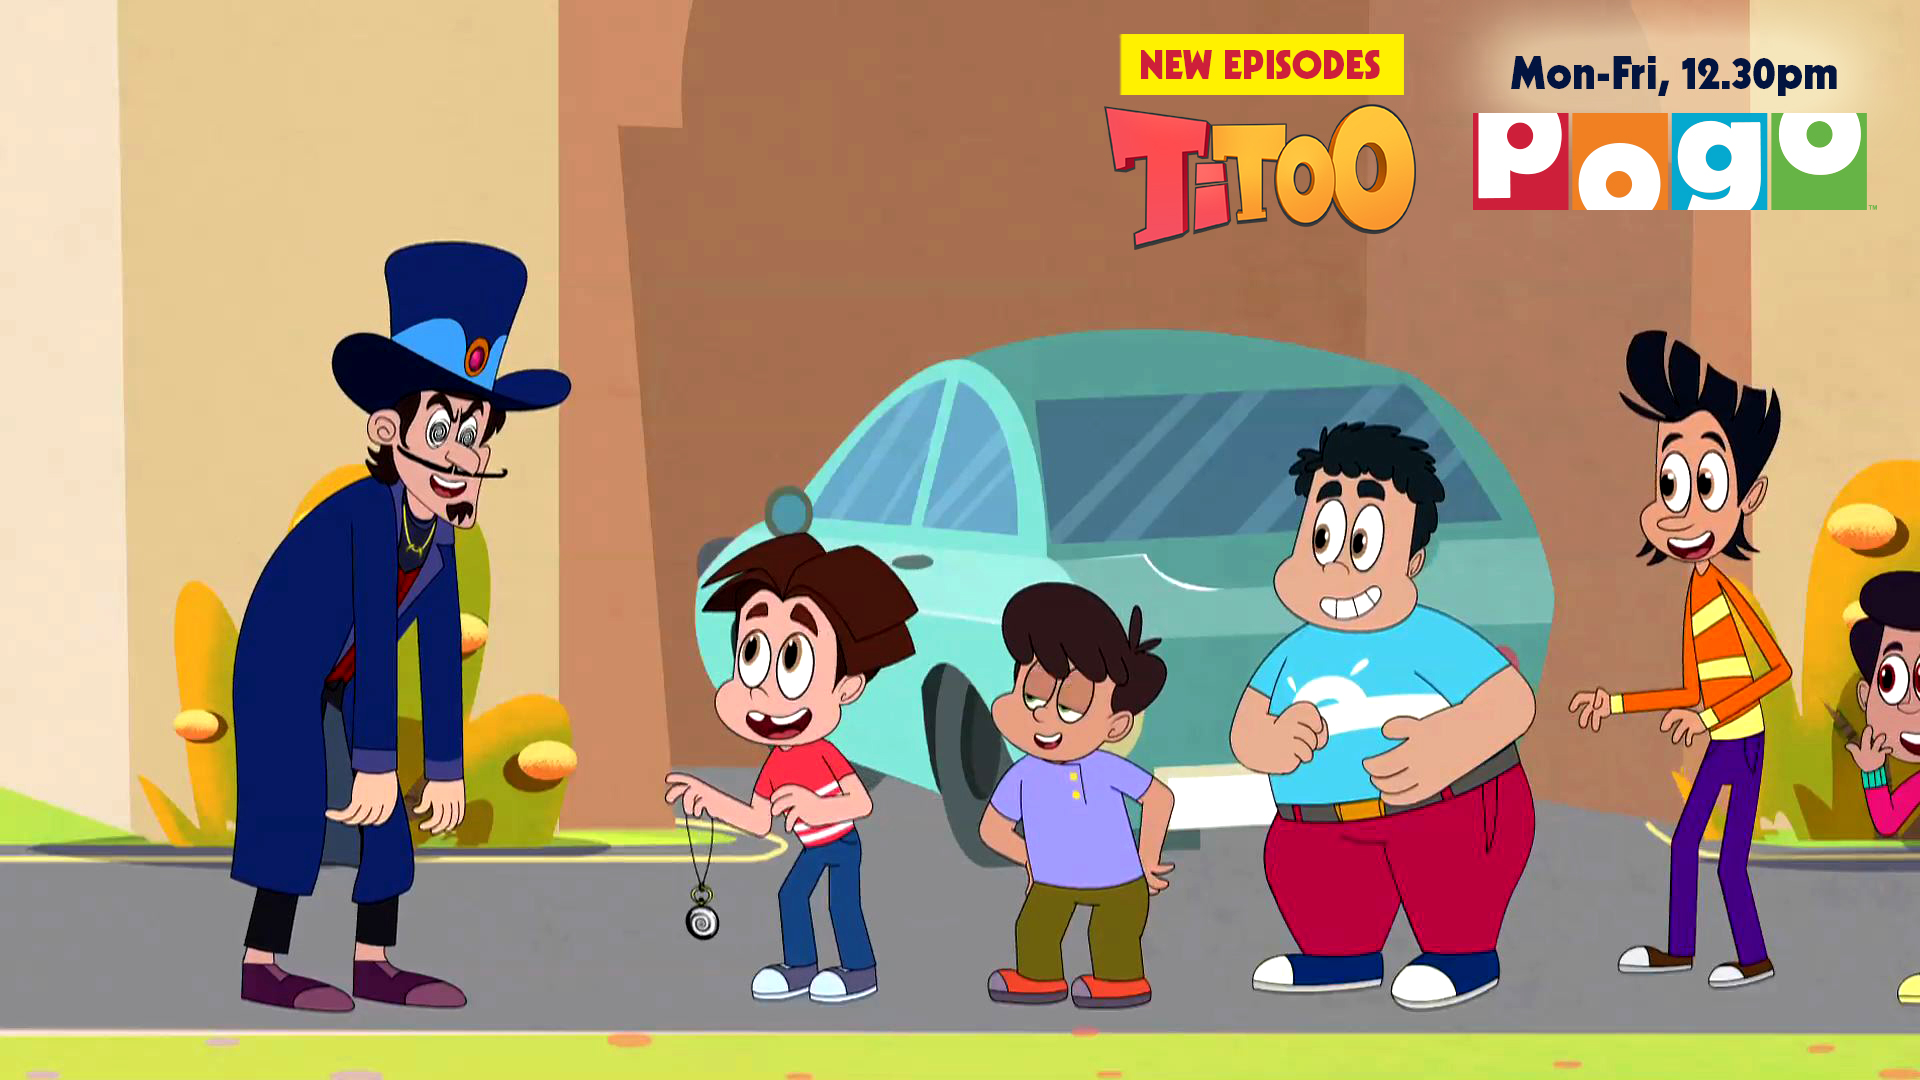 New episodes and TV specials of ‘Titoo’ to debut on Pogo